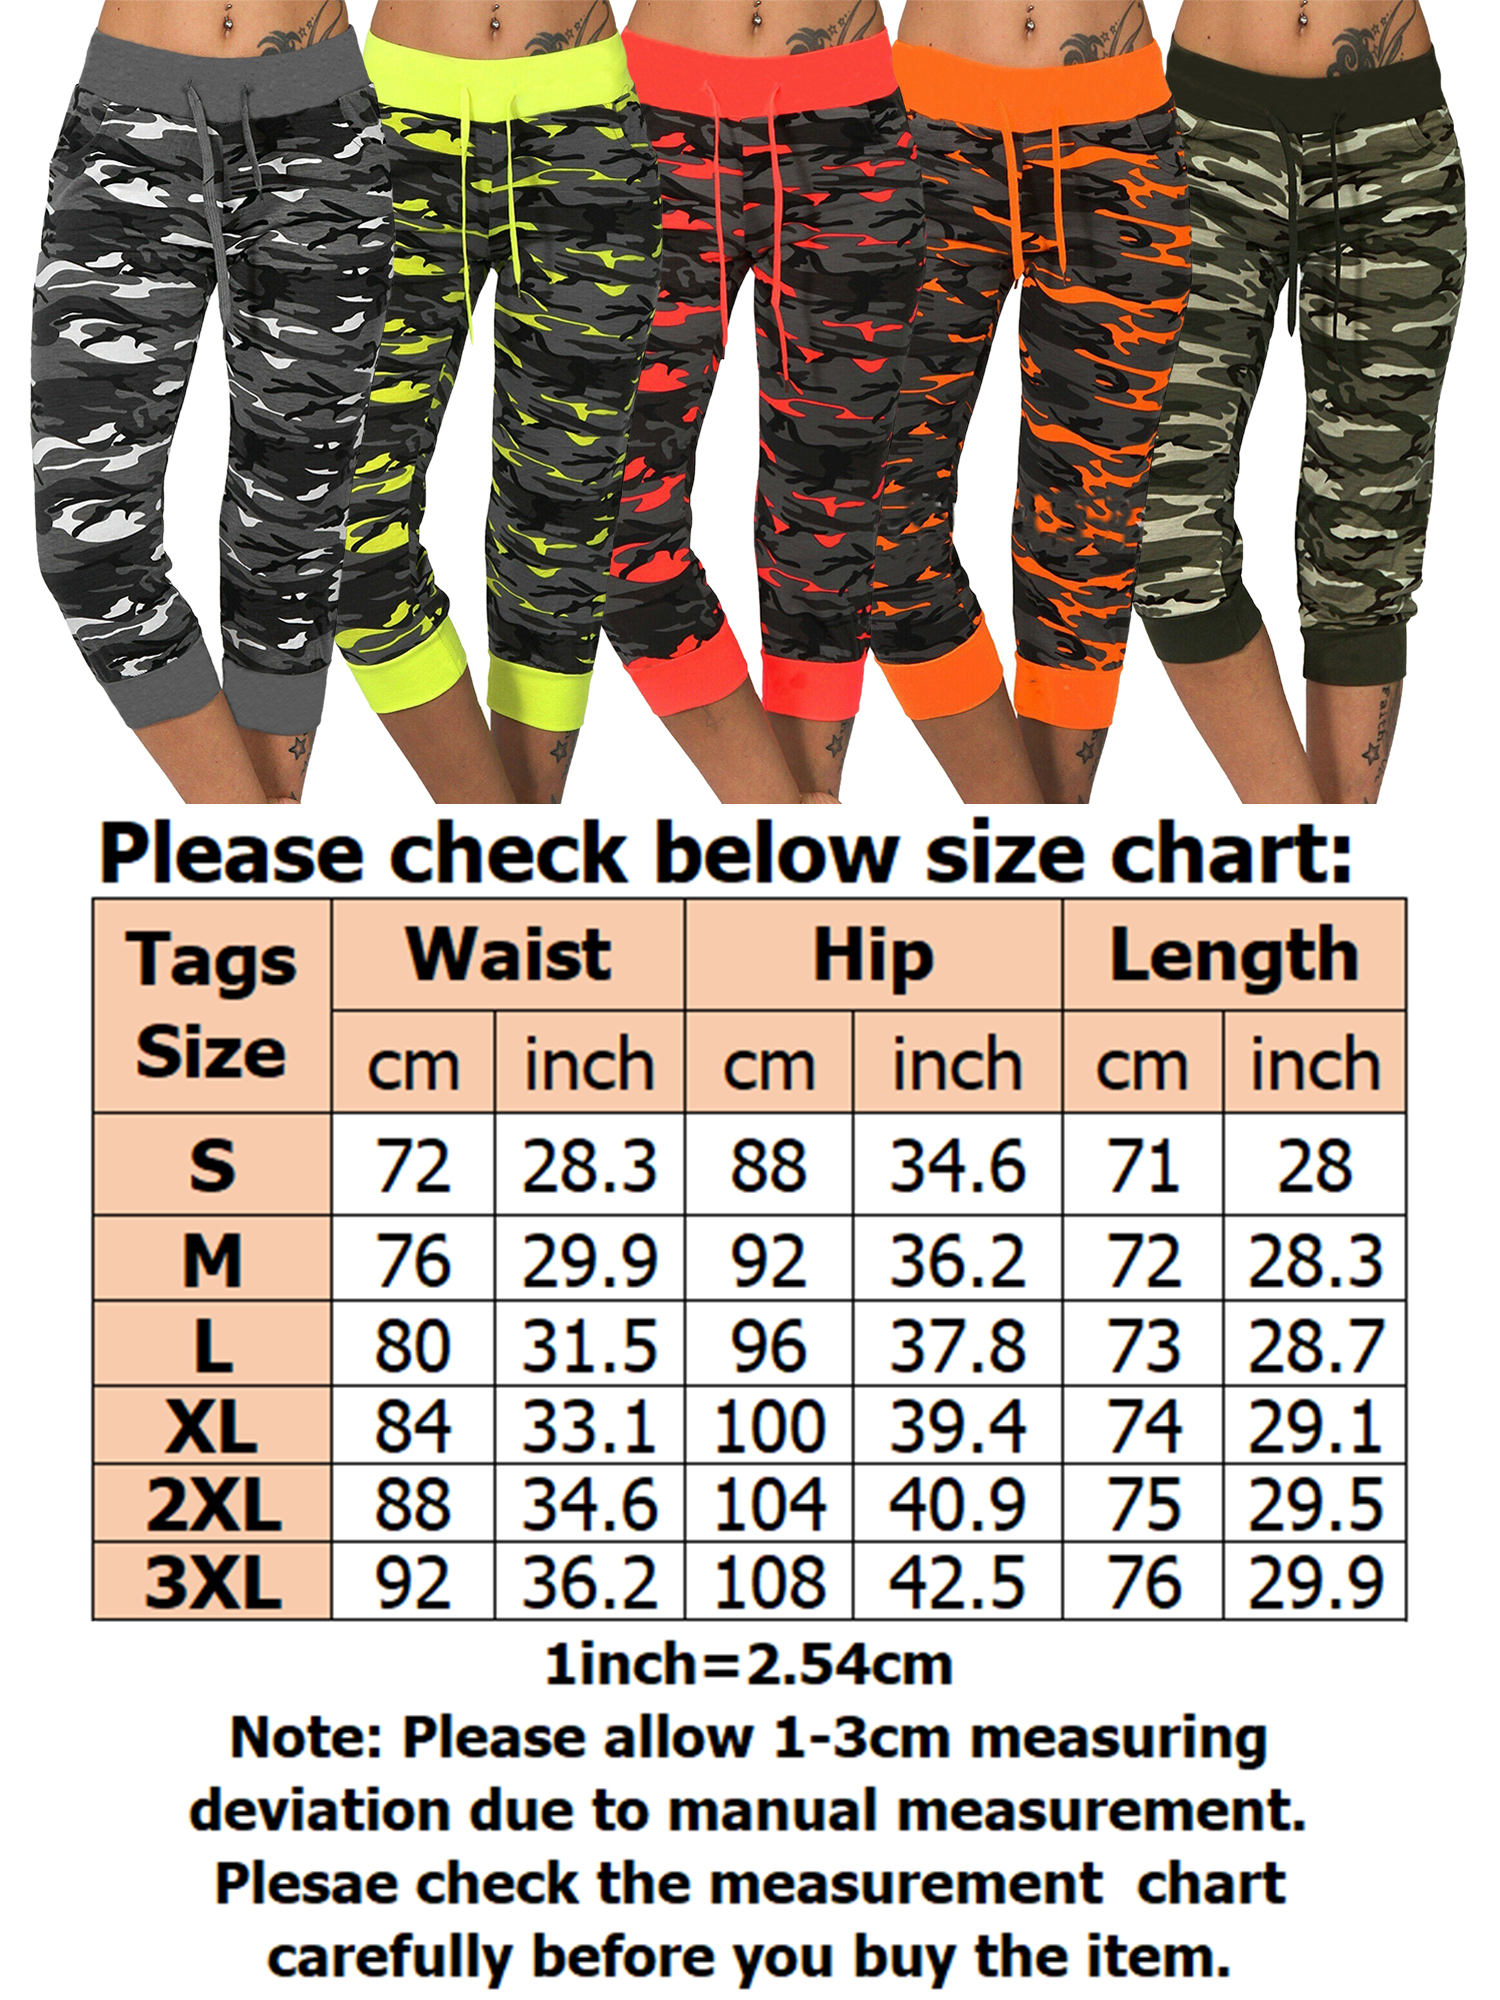 Women Oversized Camo Running Fitness Leggings Pants Skinny Crop Leg Pants Tummy Control Pockets Jegging Capris for Ladies Active Workout Trousers - image 2 of 2